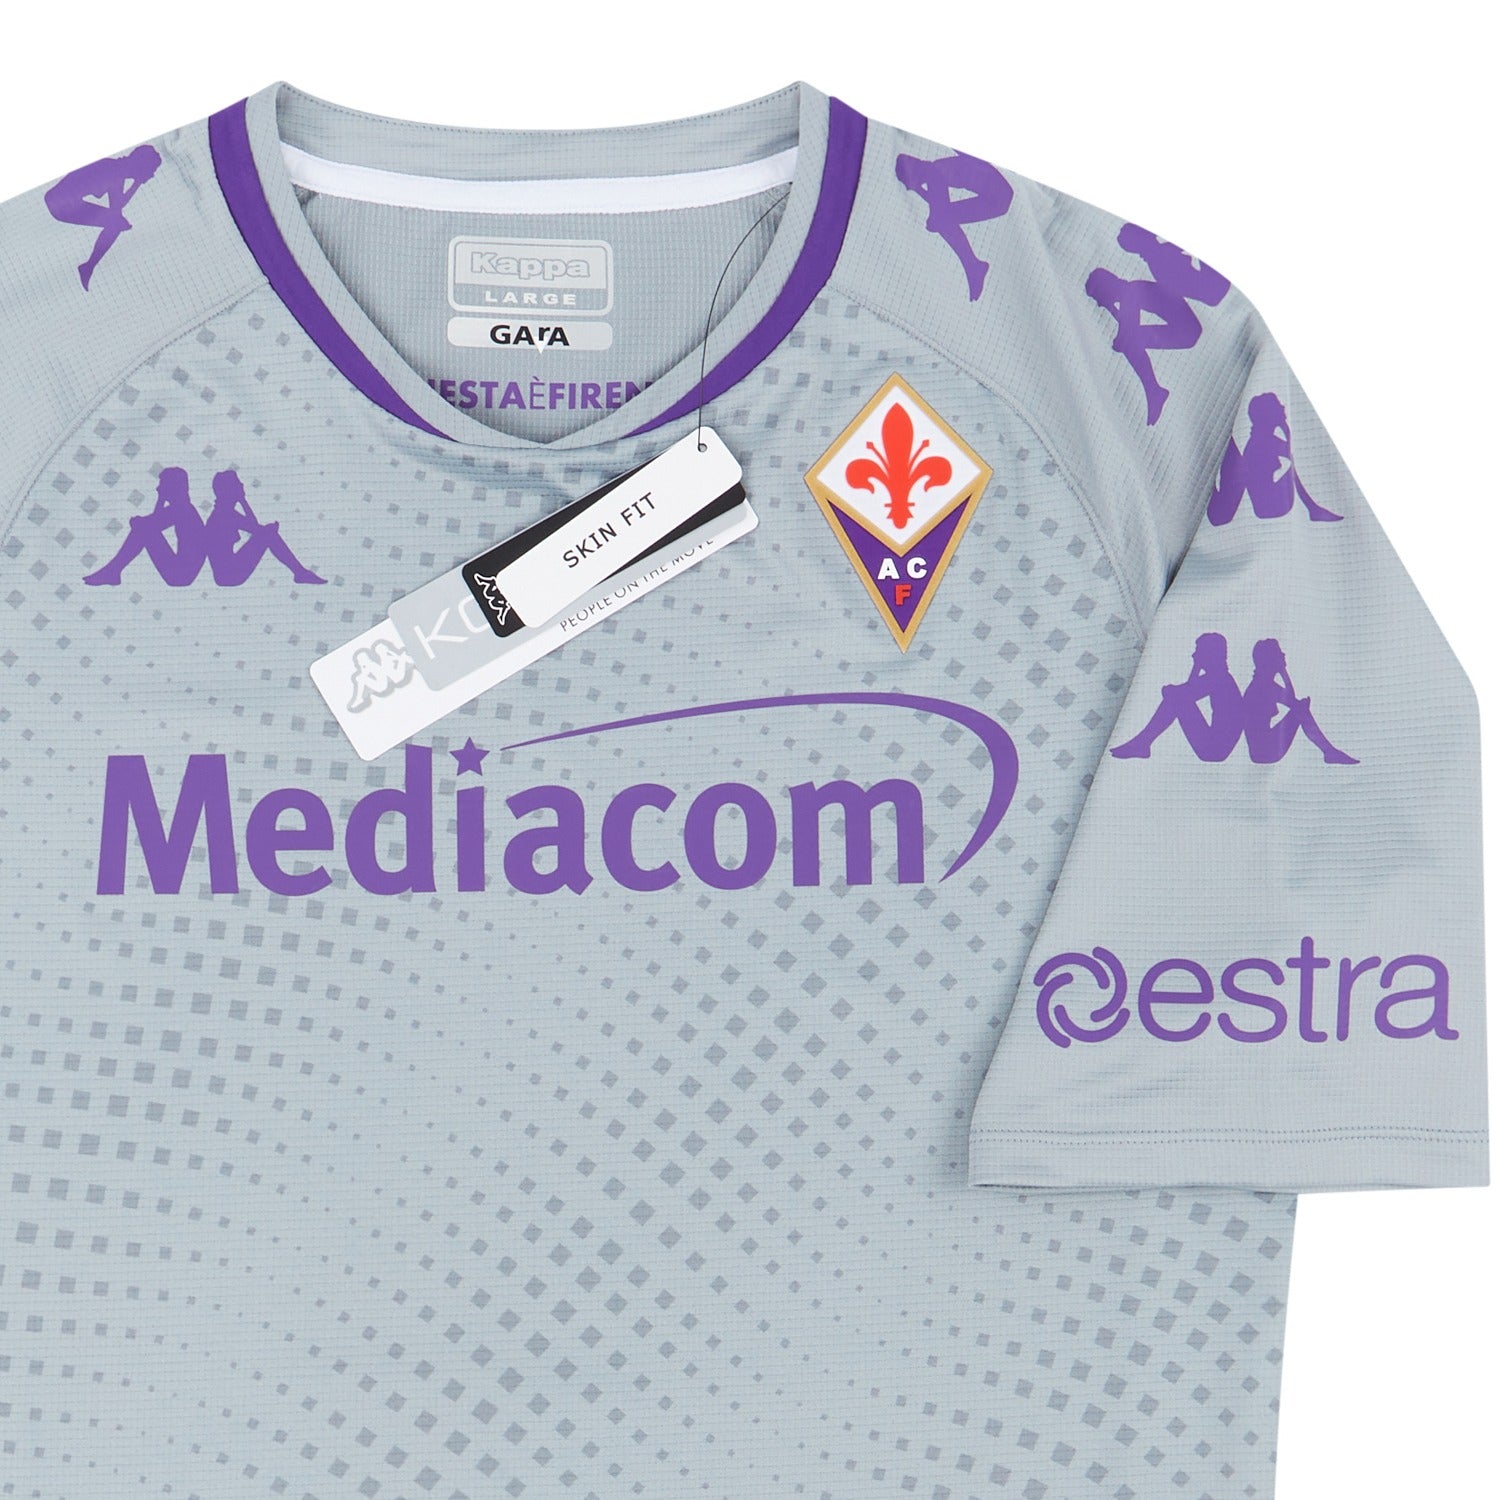 Maillot Fiorentina GK 2020-21 (GAMME PRO) RR STORE ONLINE